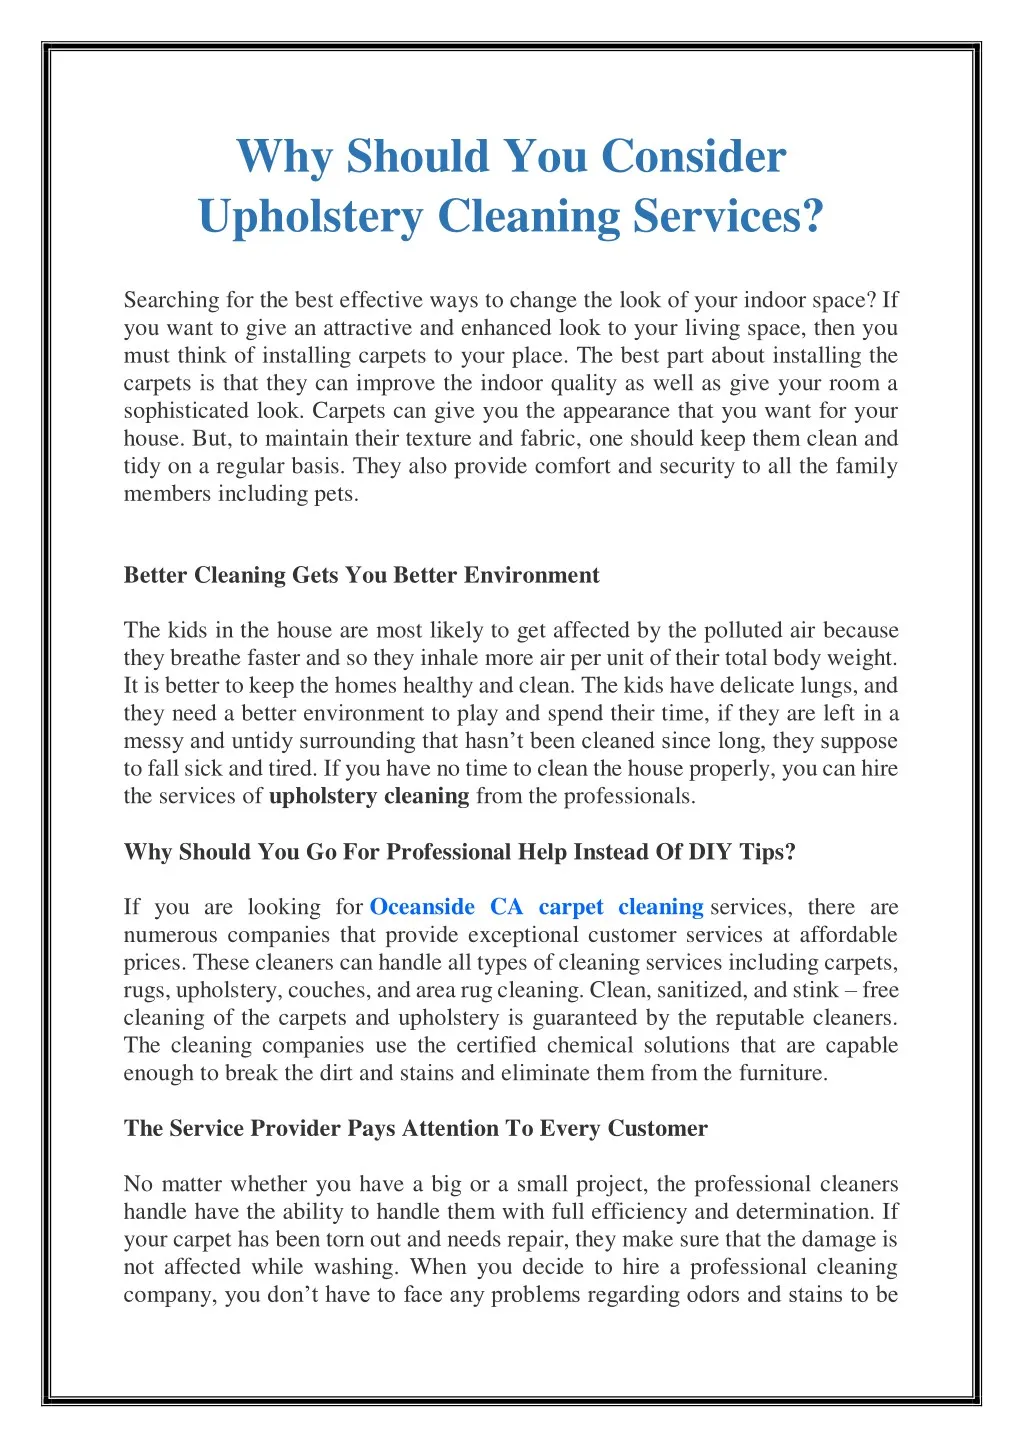 why should you consider upholstery cleaning